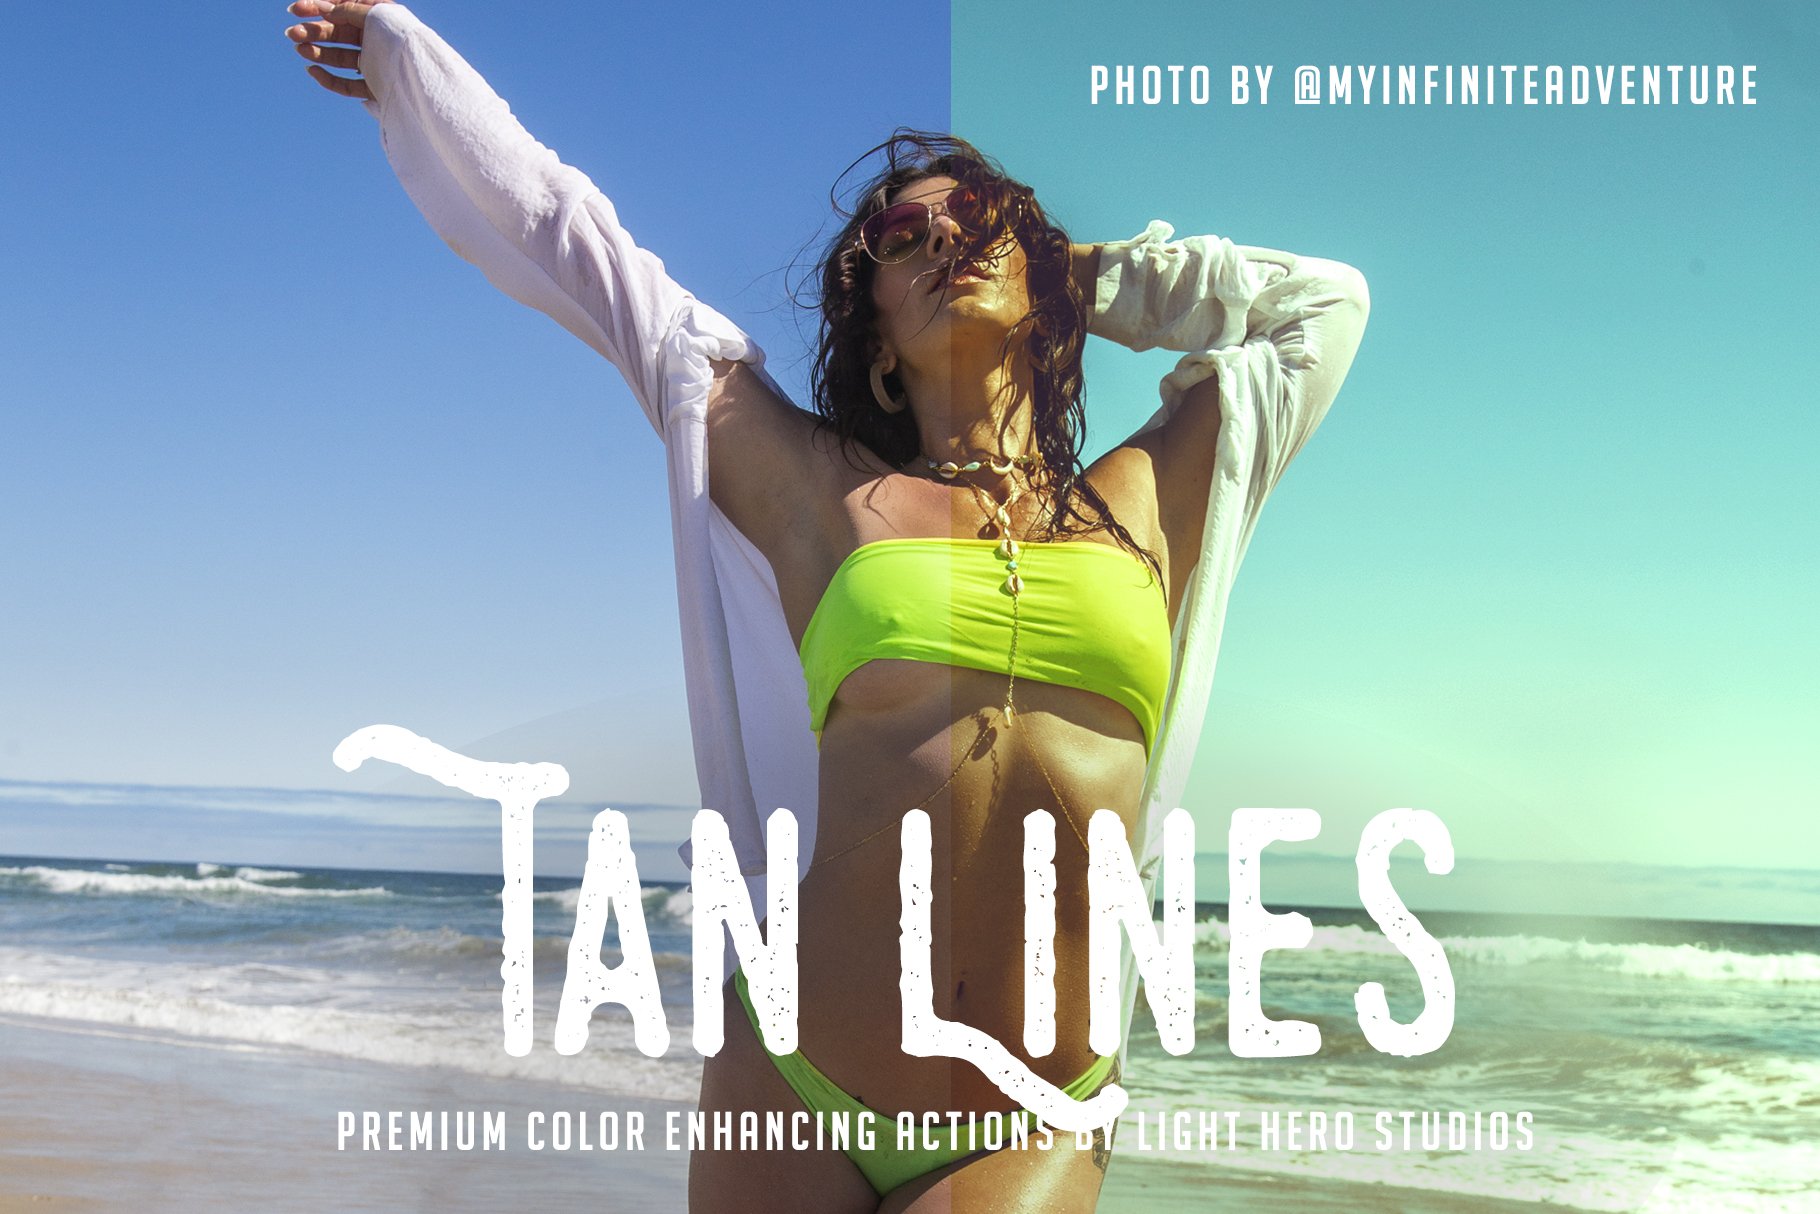 Tan Lines Photoshop Actioncover image.